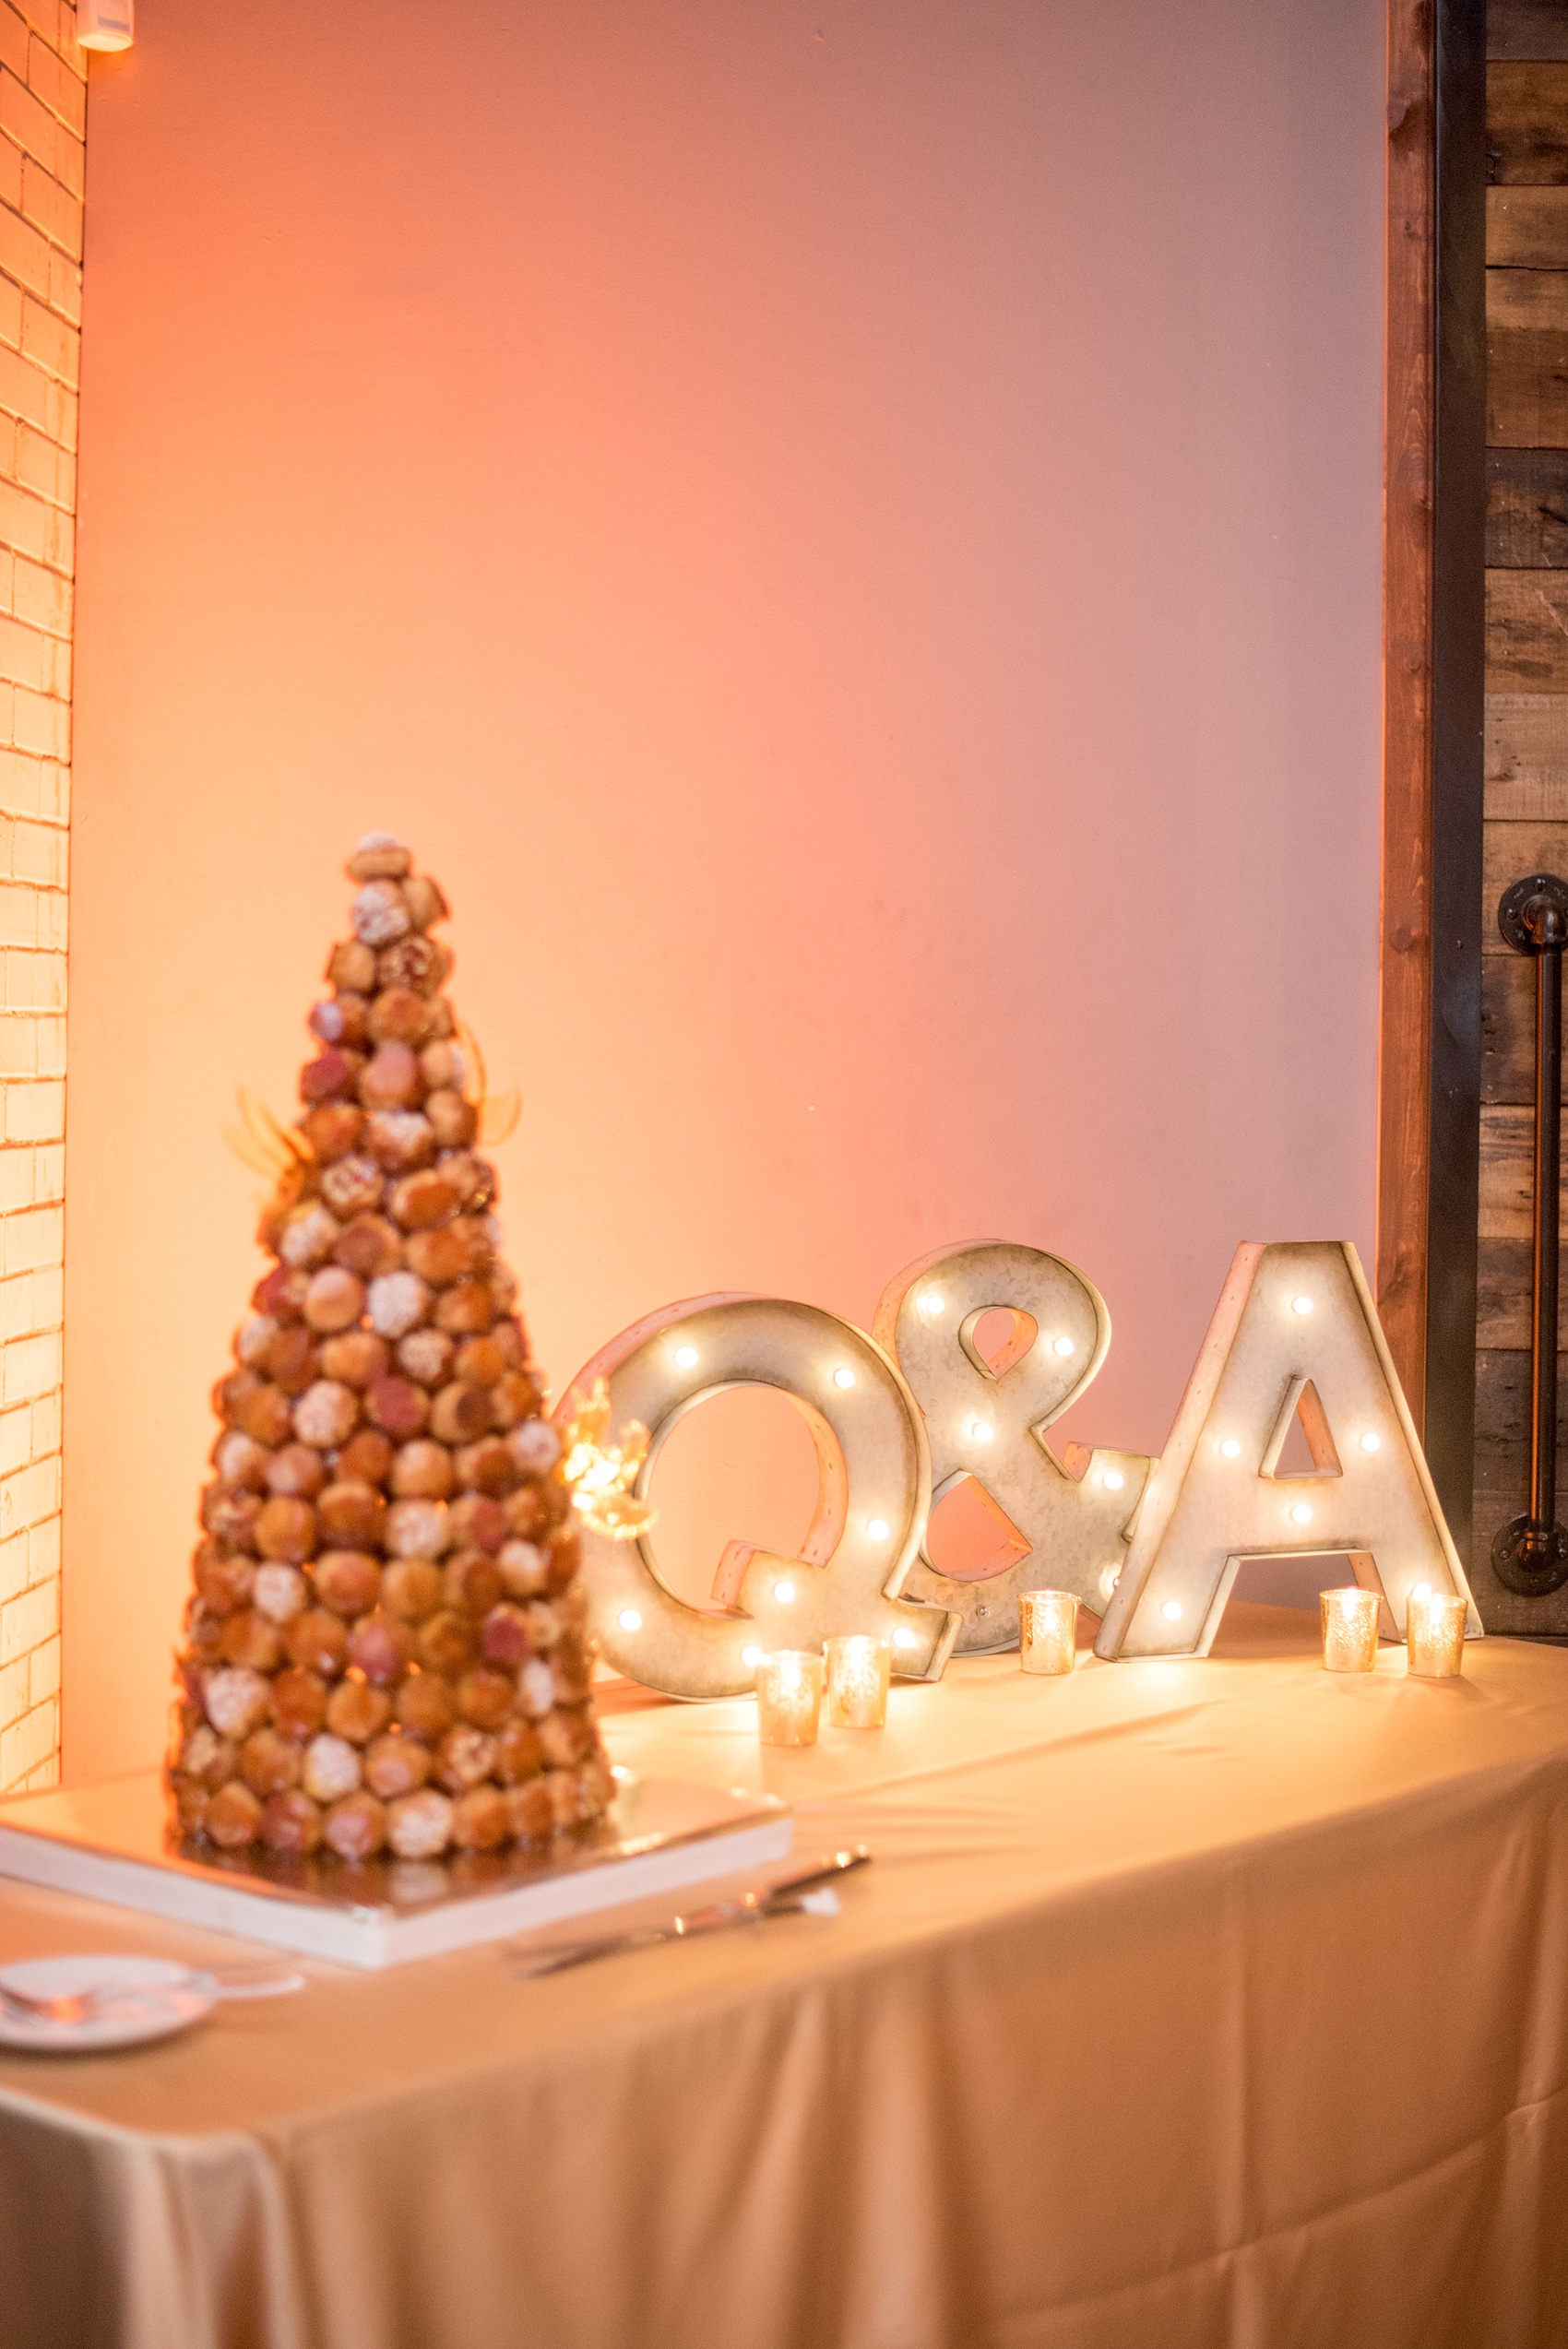 Mikkel Paige Photography photos from a wedding at 214 Martin Street in downtown Raleigh. Dessert table with a traditional french Croquembouche by LucetteGrace.